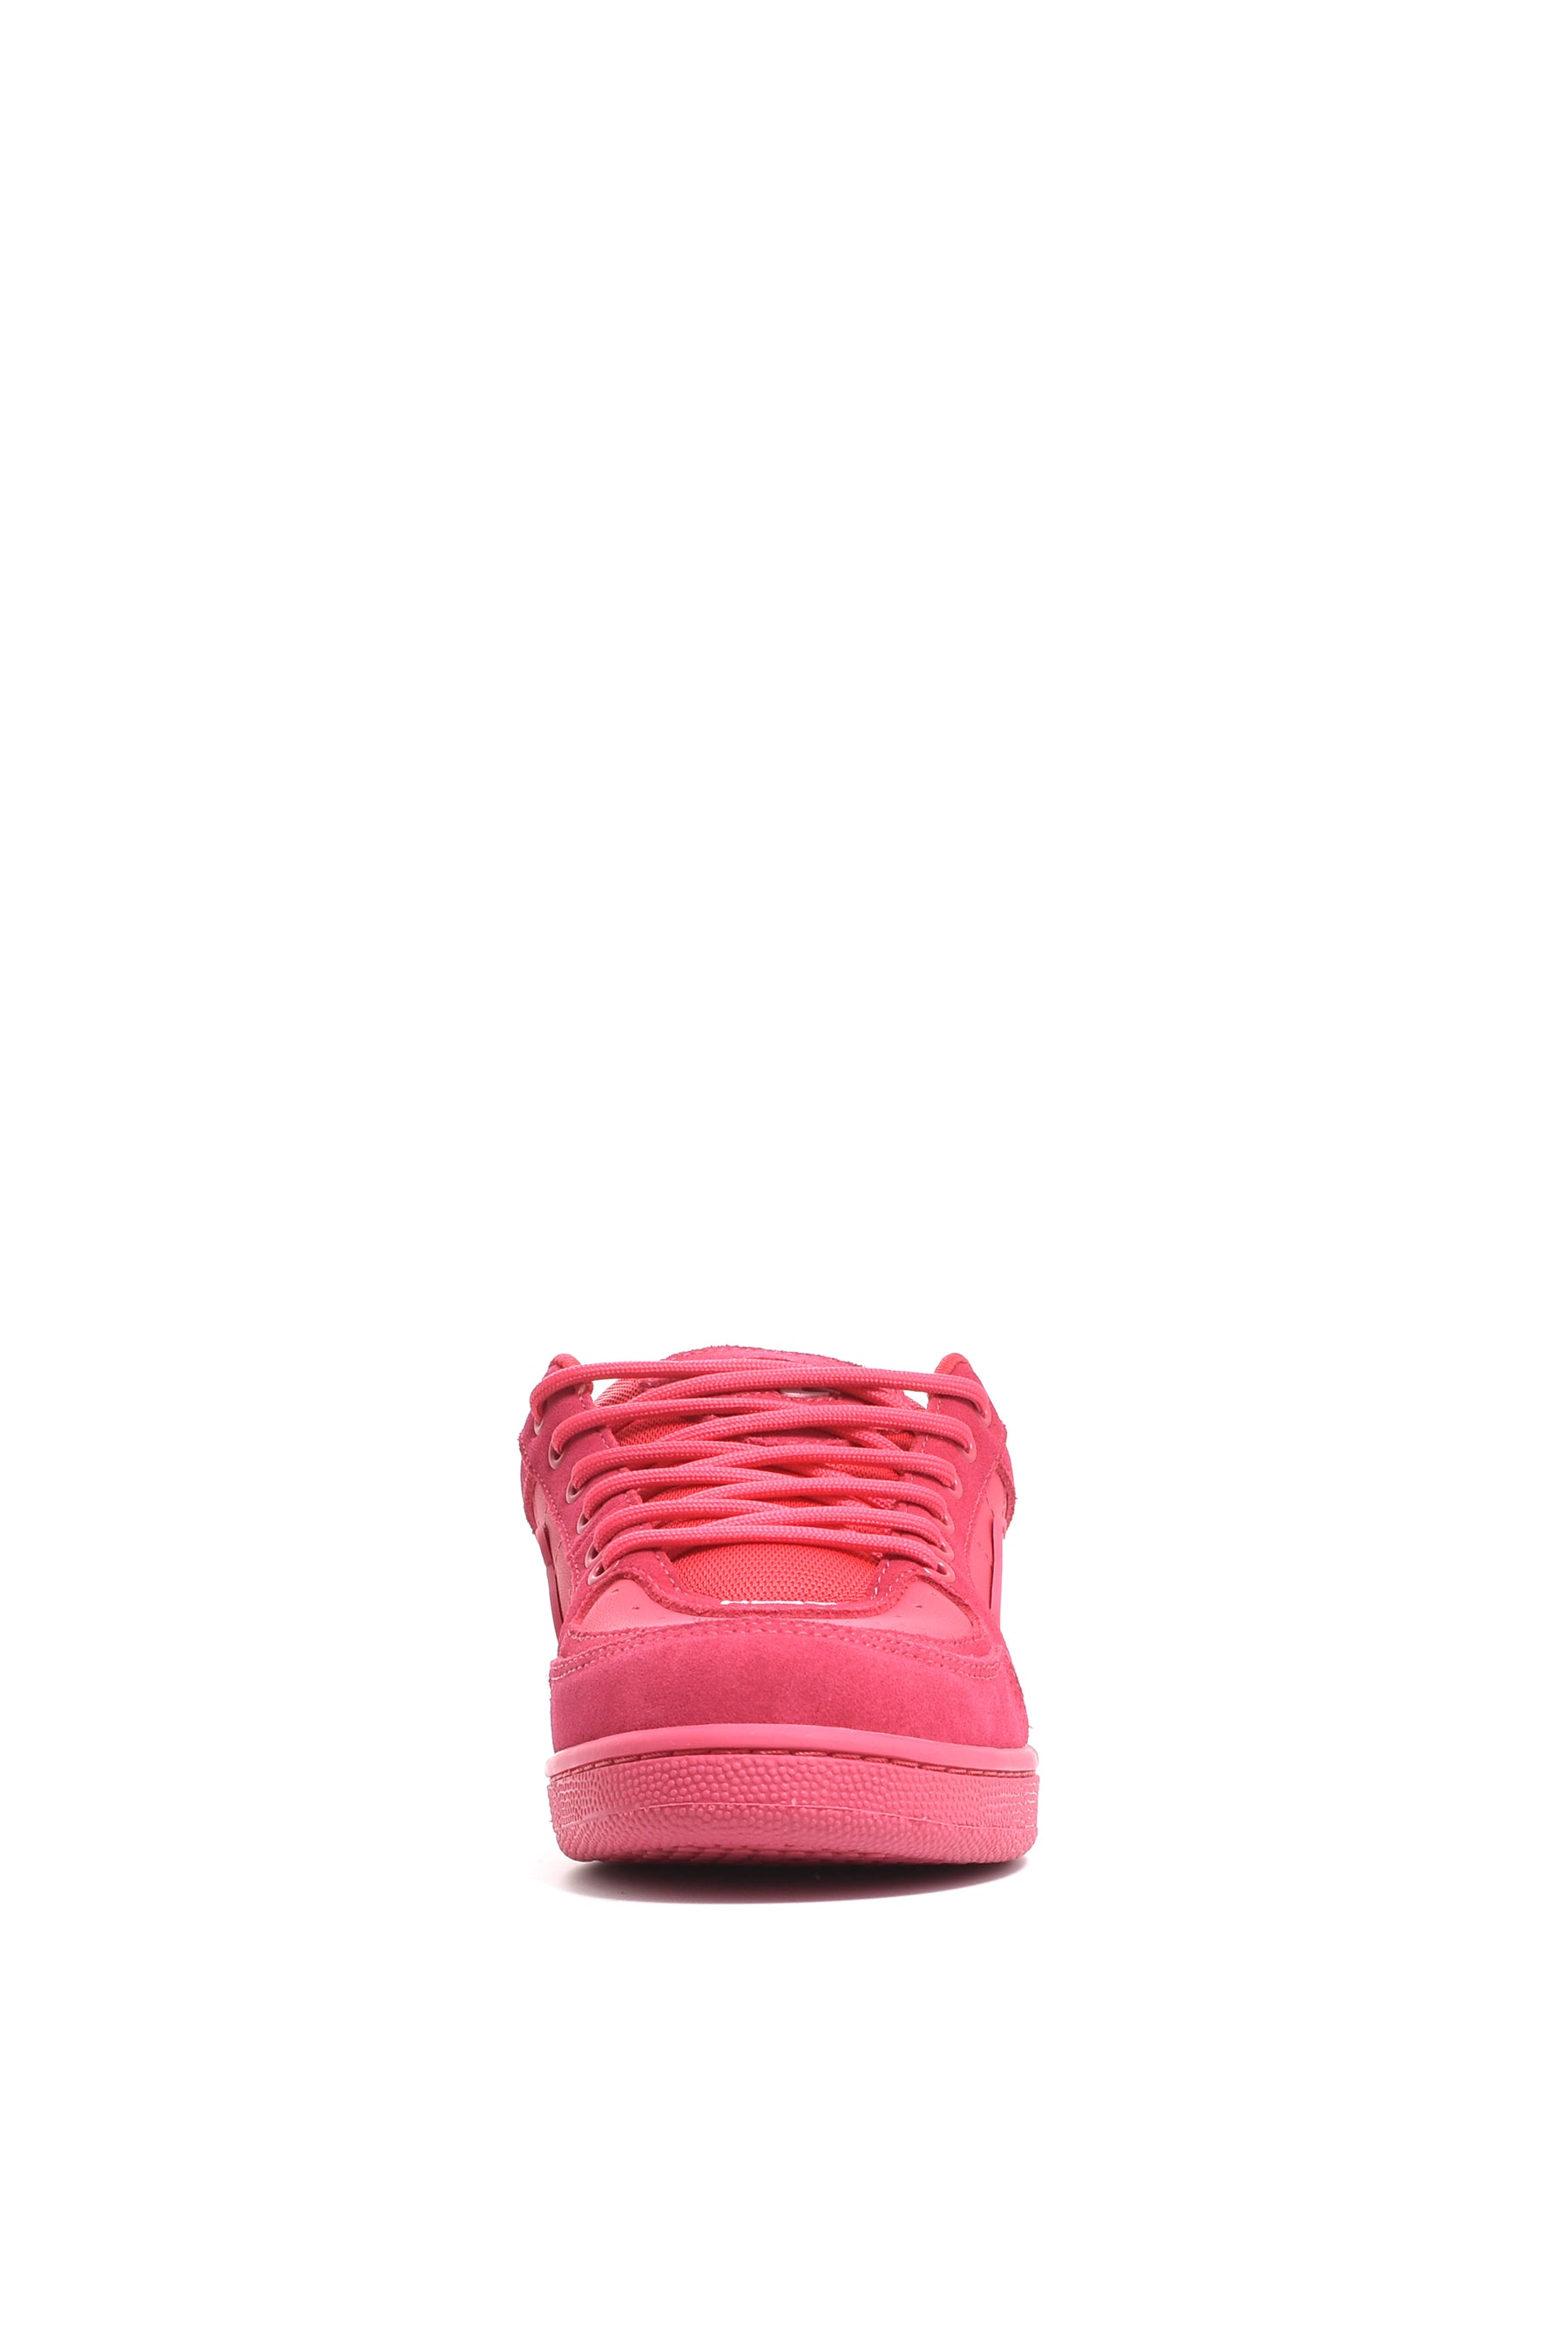 DRAGONFLY SHOE / PINK